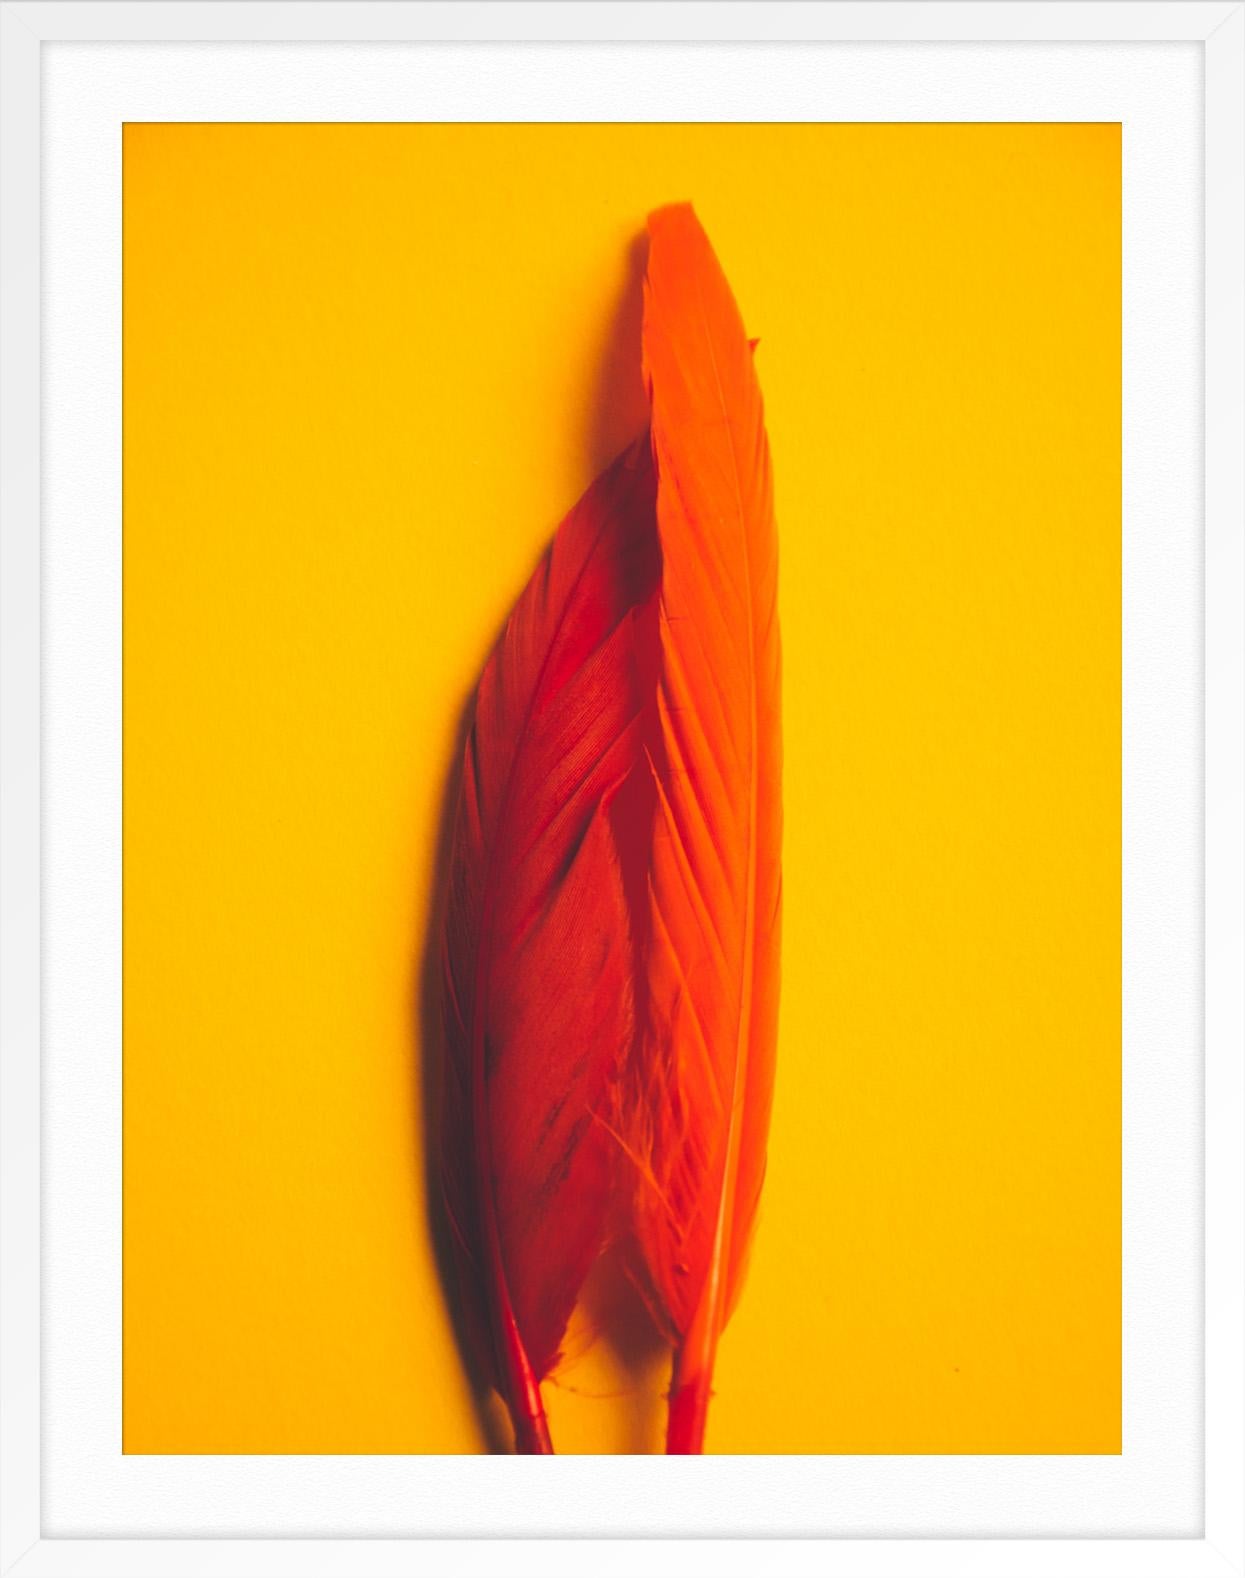 Feather or Not 2 - Orange Abstract Print by Maria Piessis